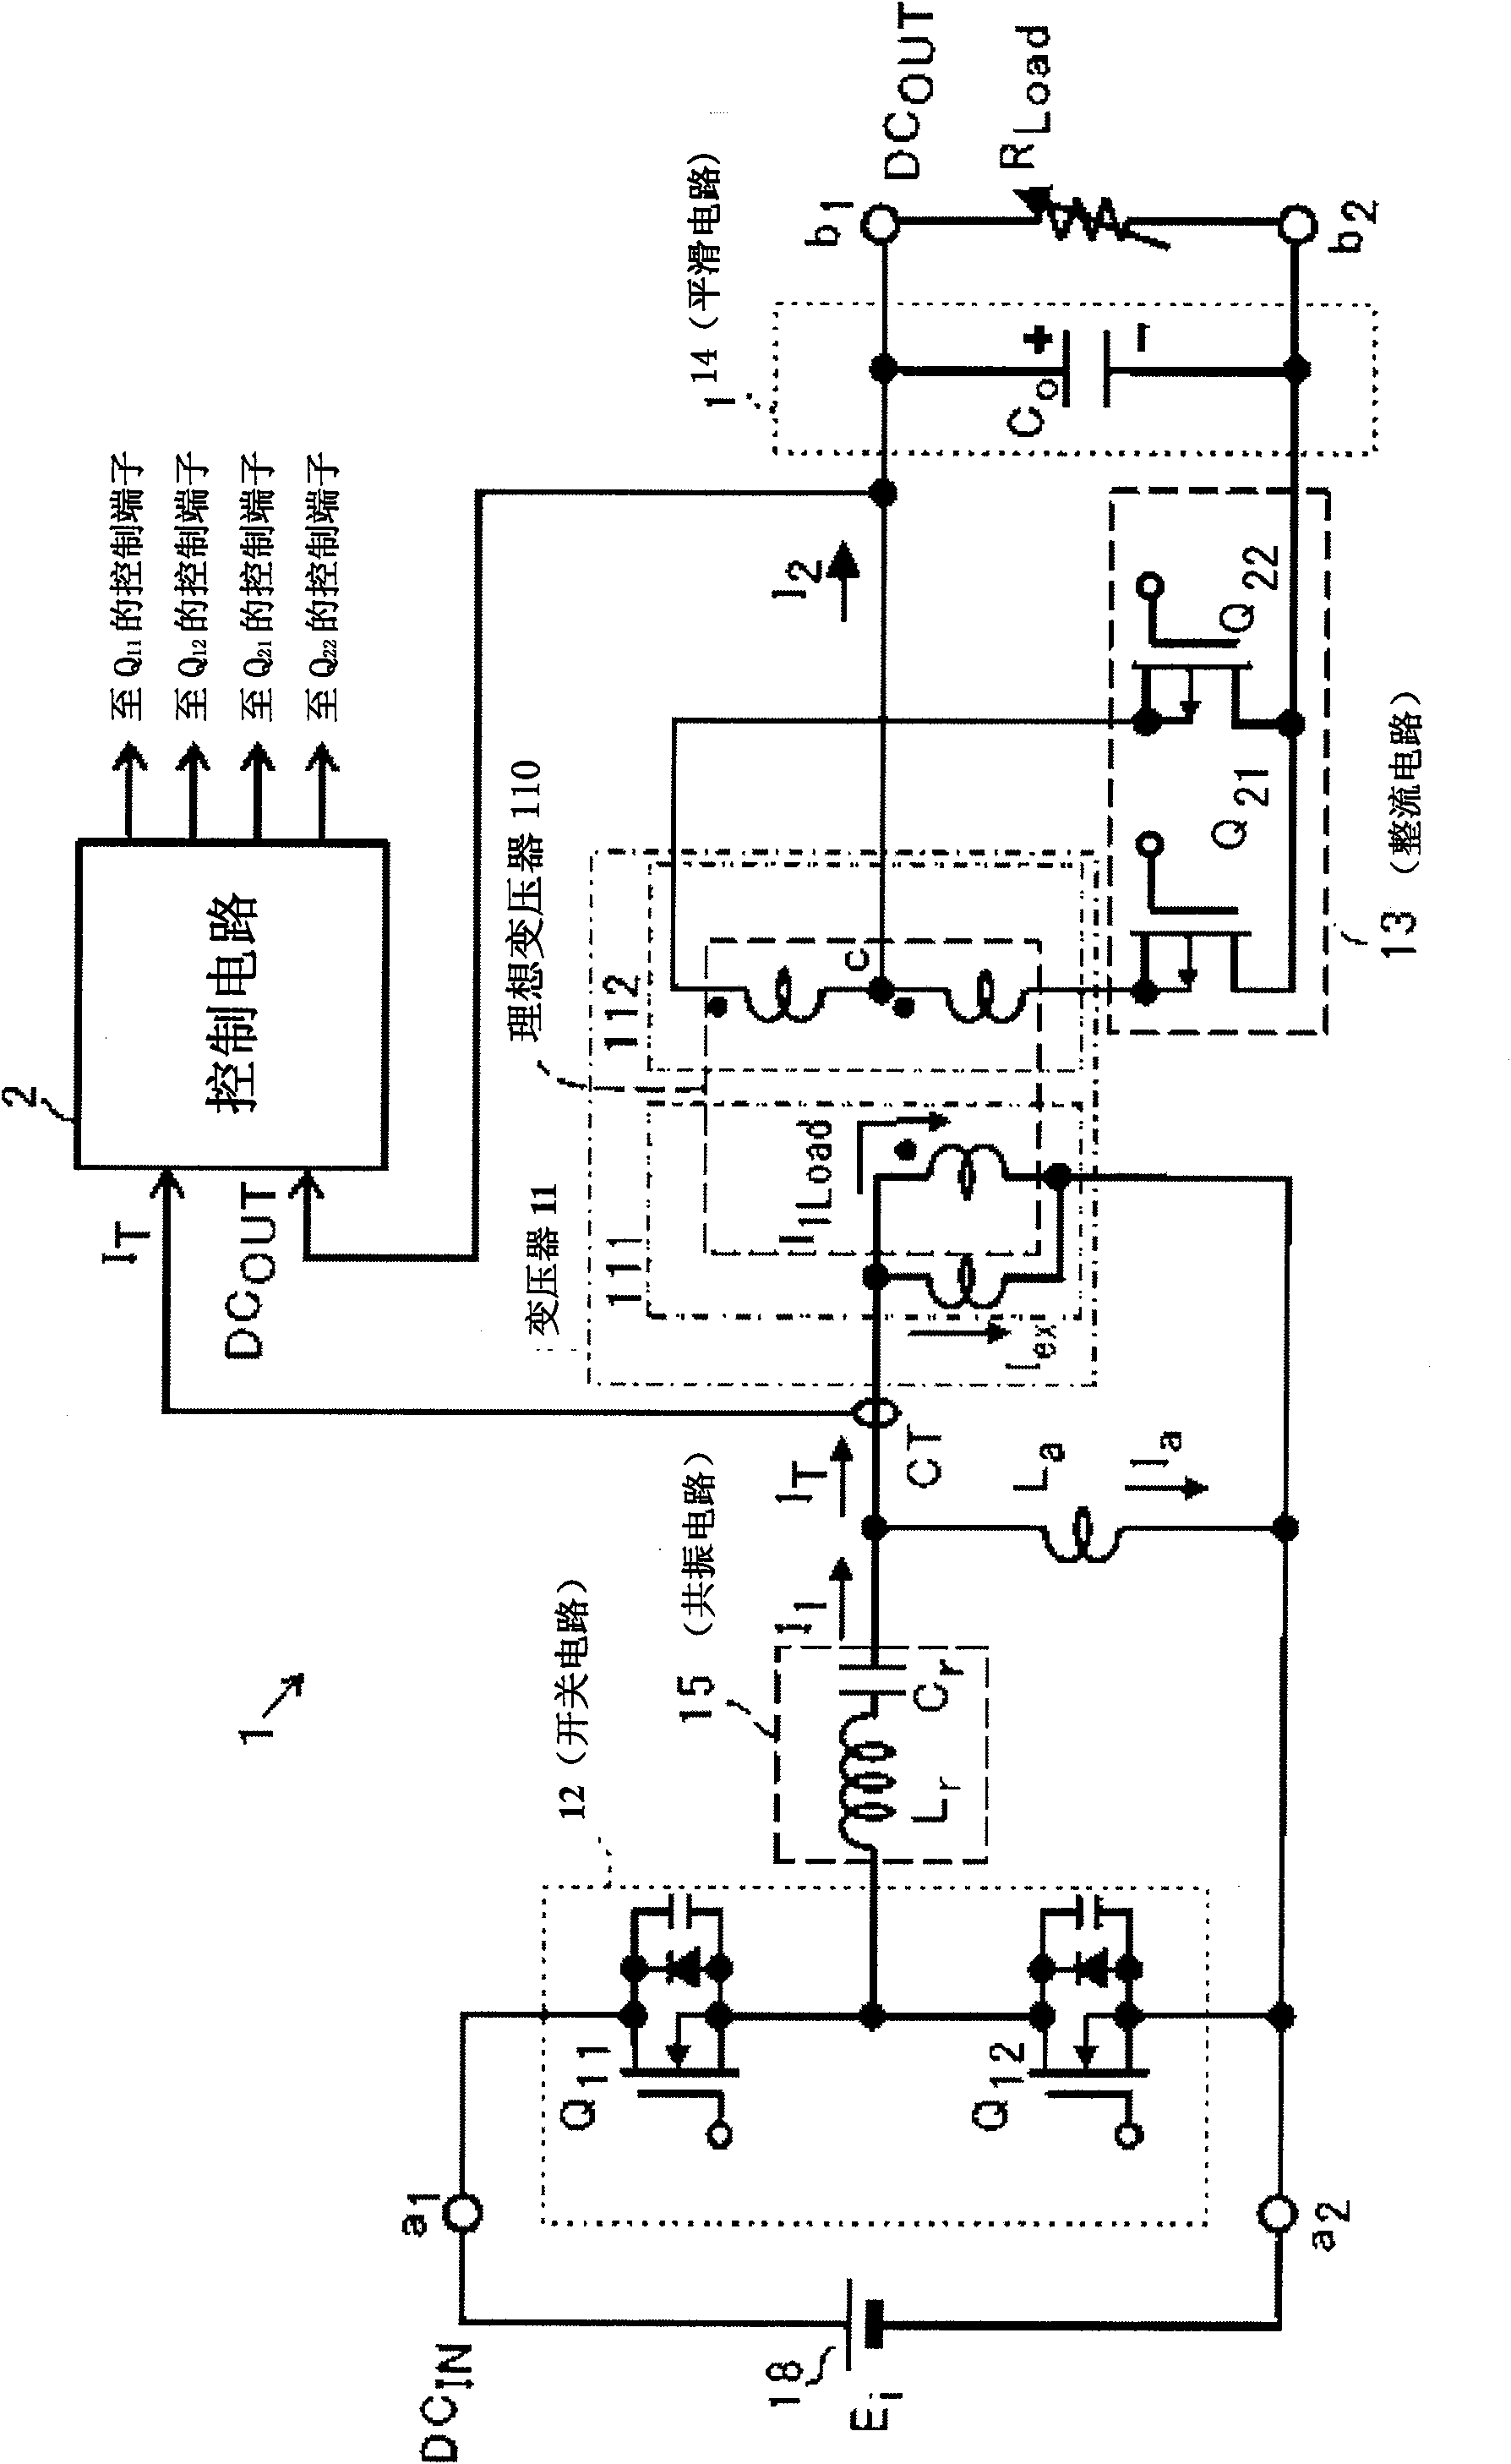 Current detecting circuit and transformer current measuring system